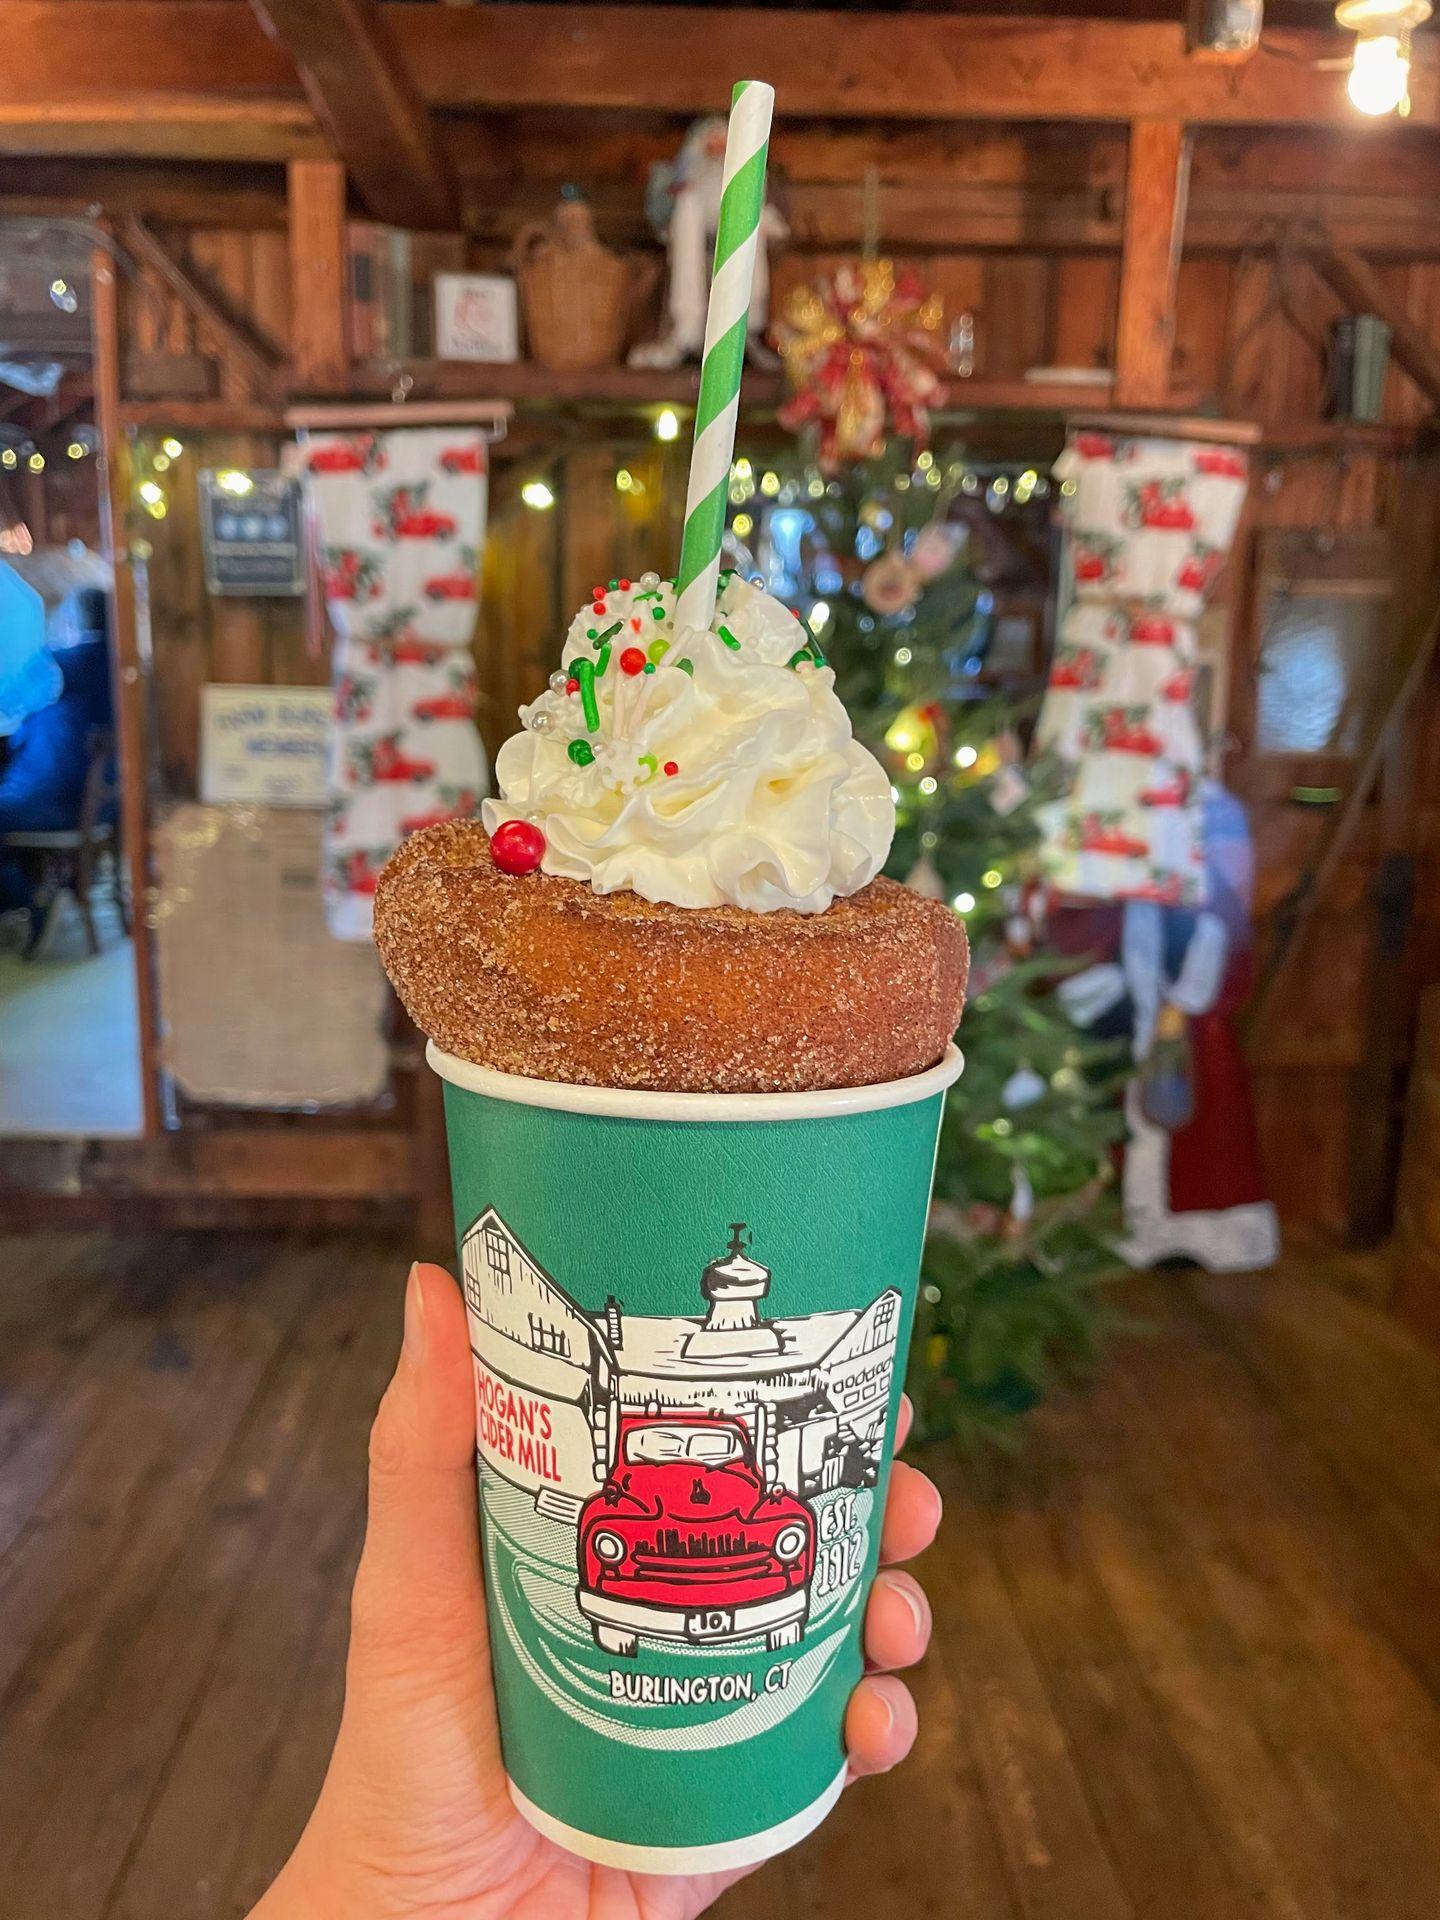 A cup of hot cider topped with an apple cider donut and whipped cream. The cider is in a green, paper cup with artwork depicting Hogan's Cider Mill.